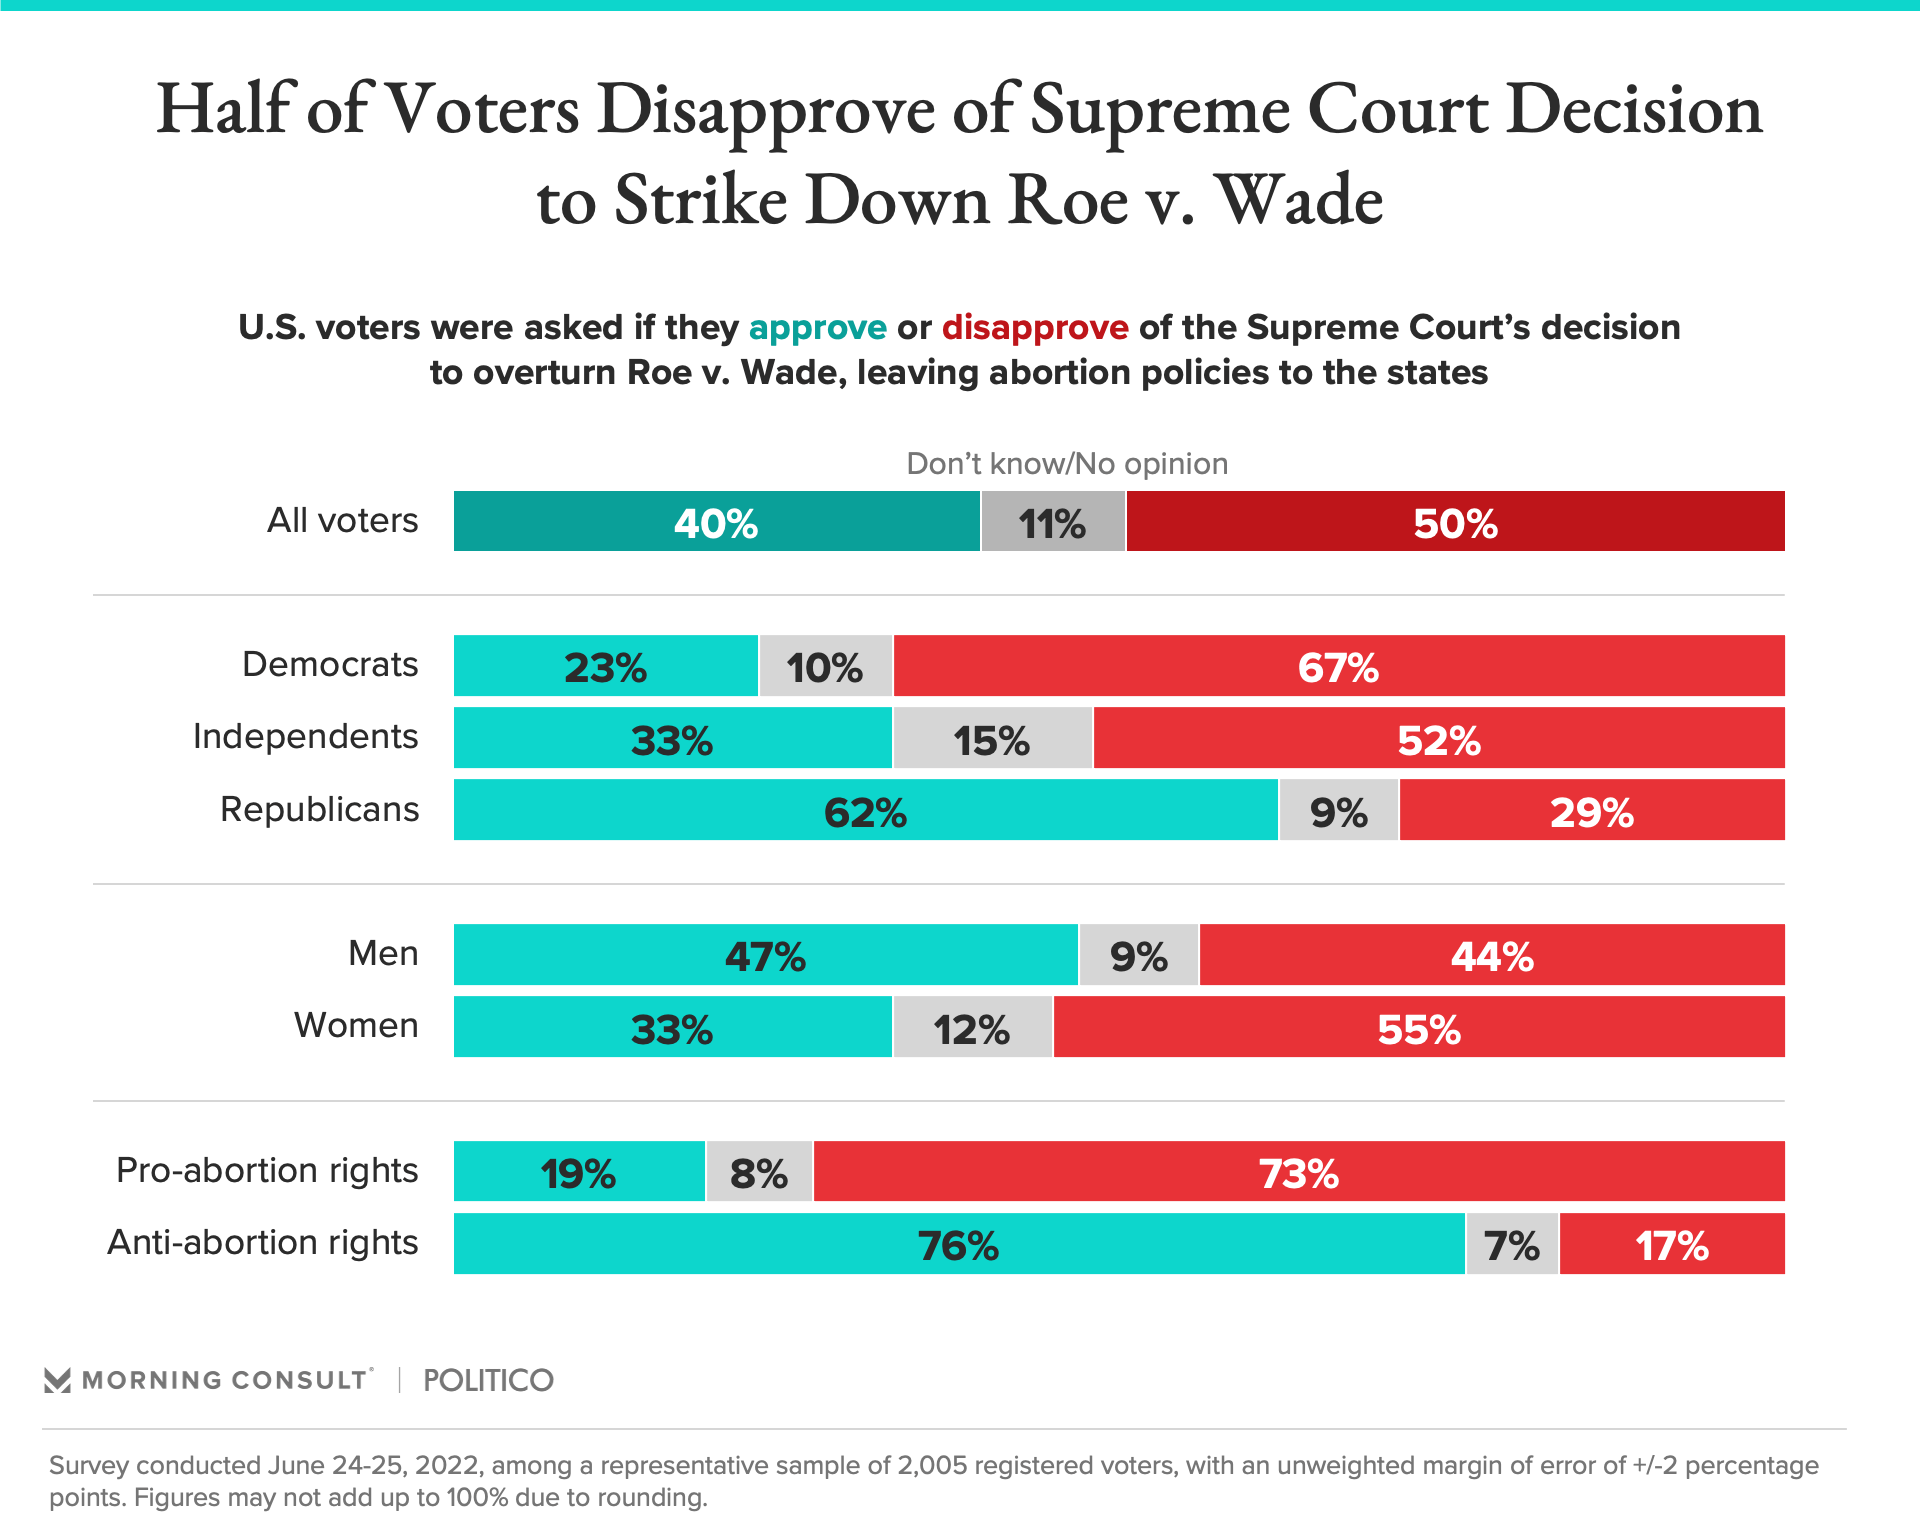 50% of voters disapprove of the Supreme Court’s decision to overturn Roe v. Wade, while 40% approve